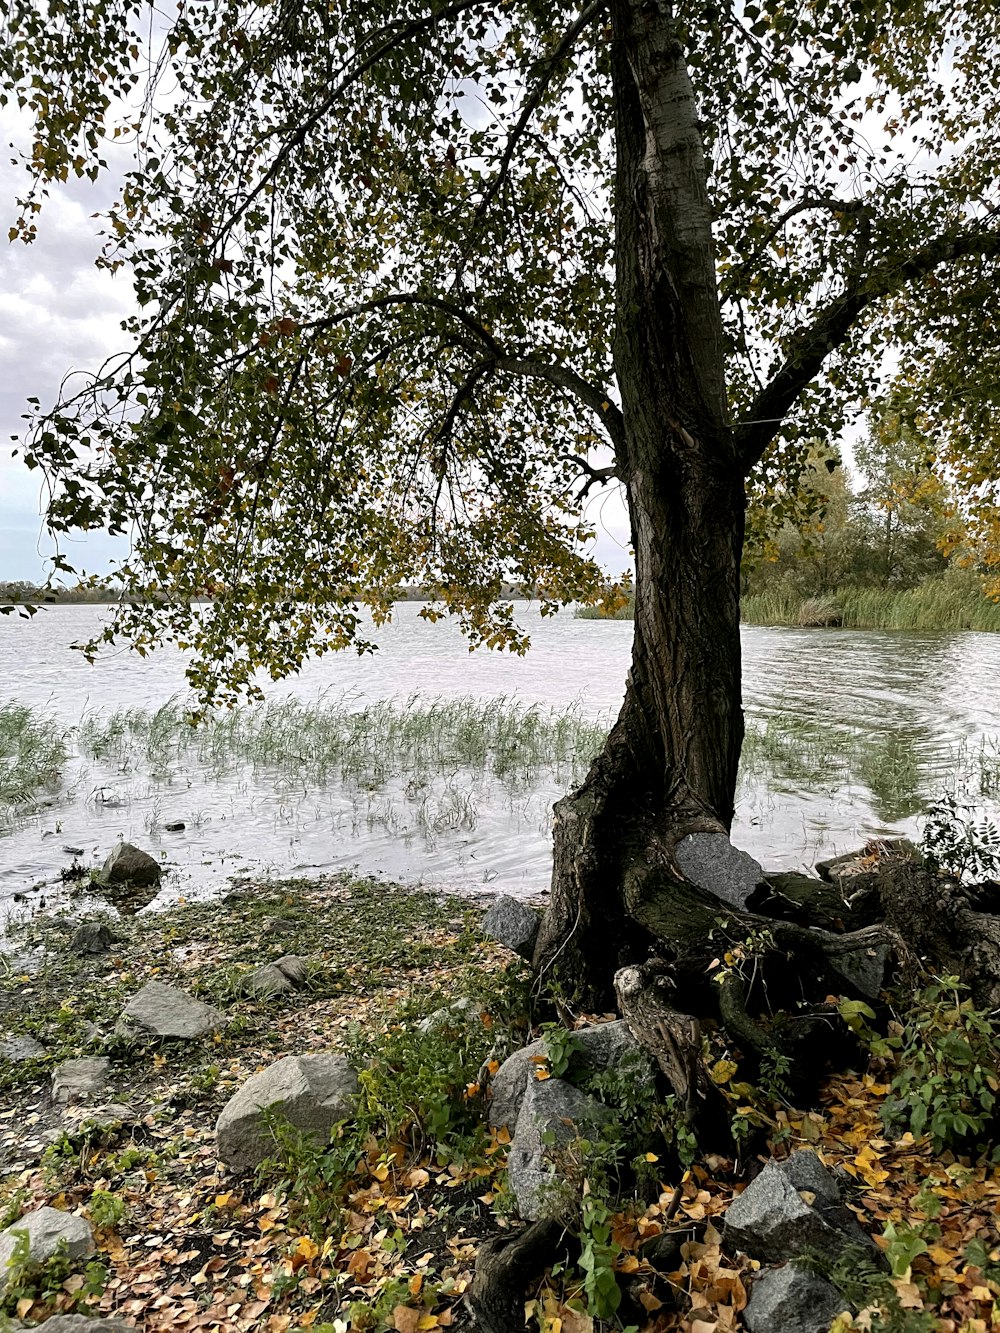 a bench under a tree next to a body of water